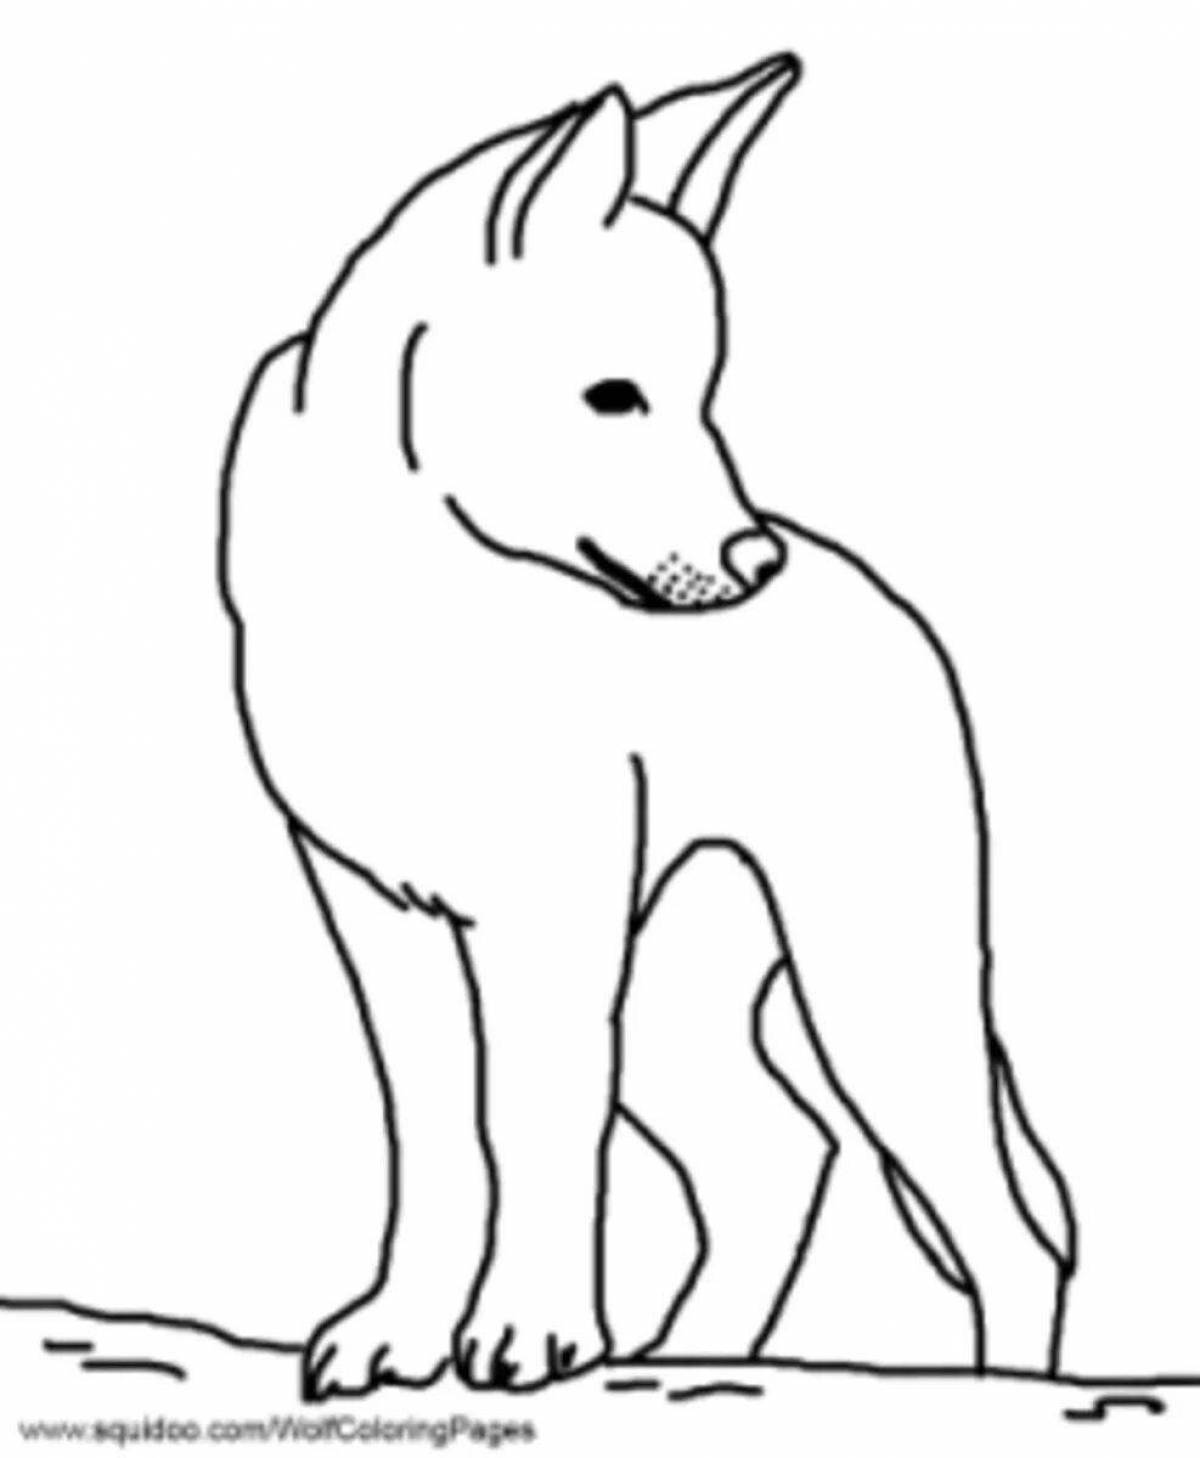 Dingo dog coloring page